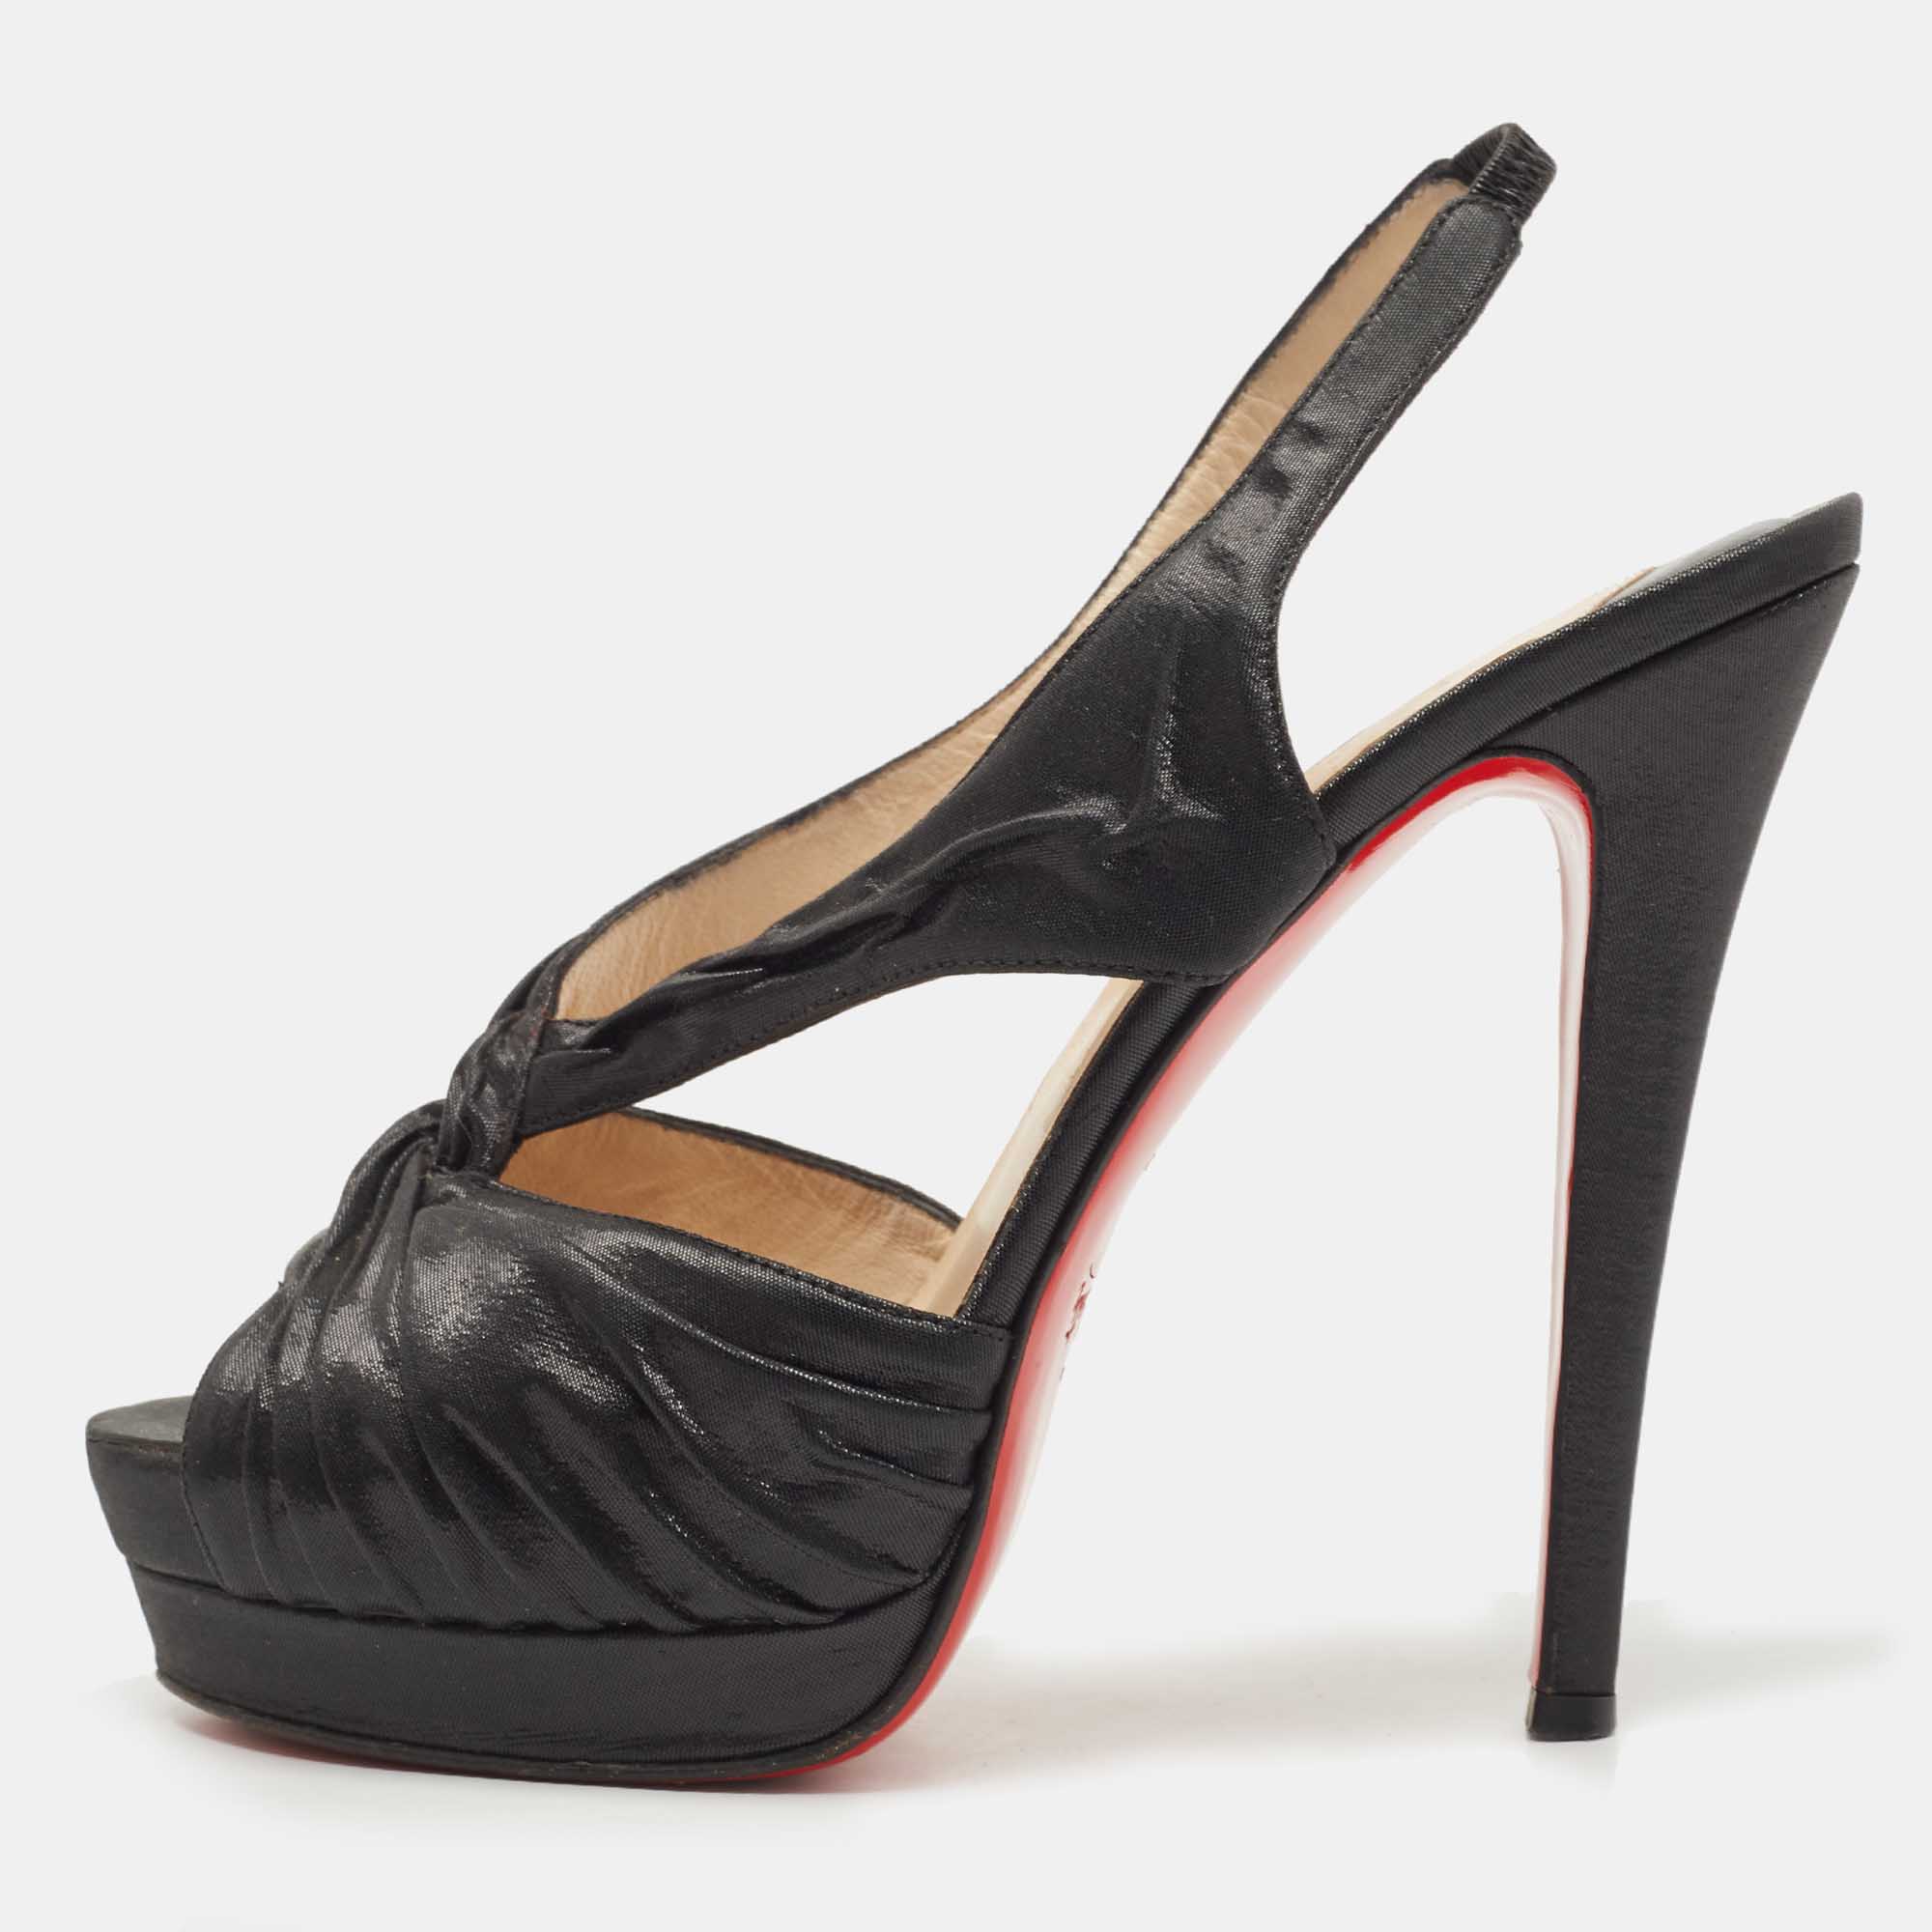 Pre-owned Christian Louboutin Black Shimmery Fabric Fortuna Sandals Size 37.5